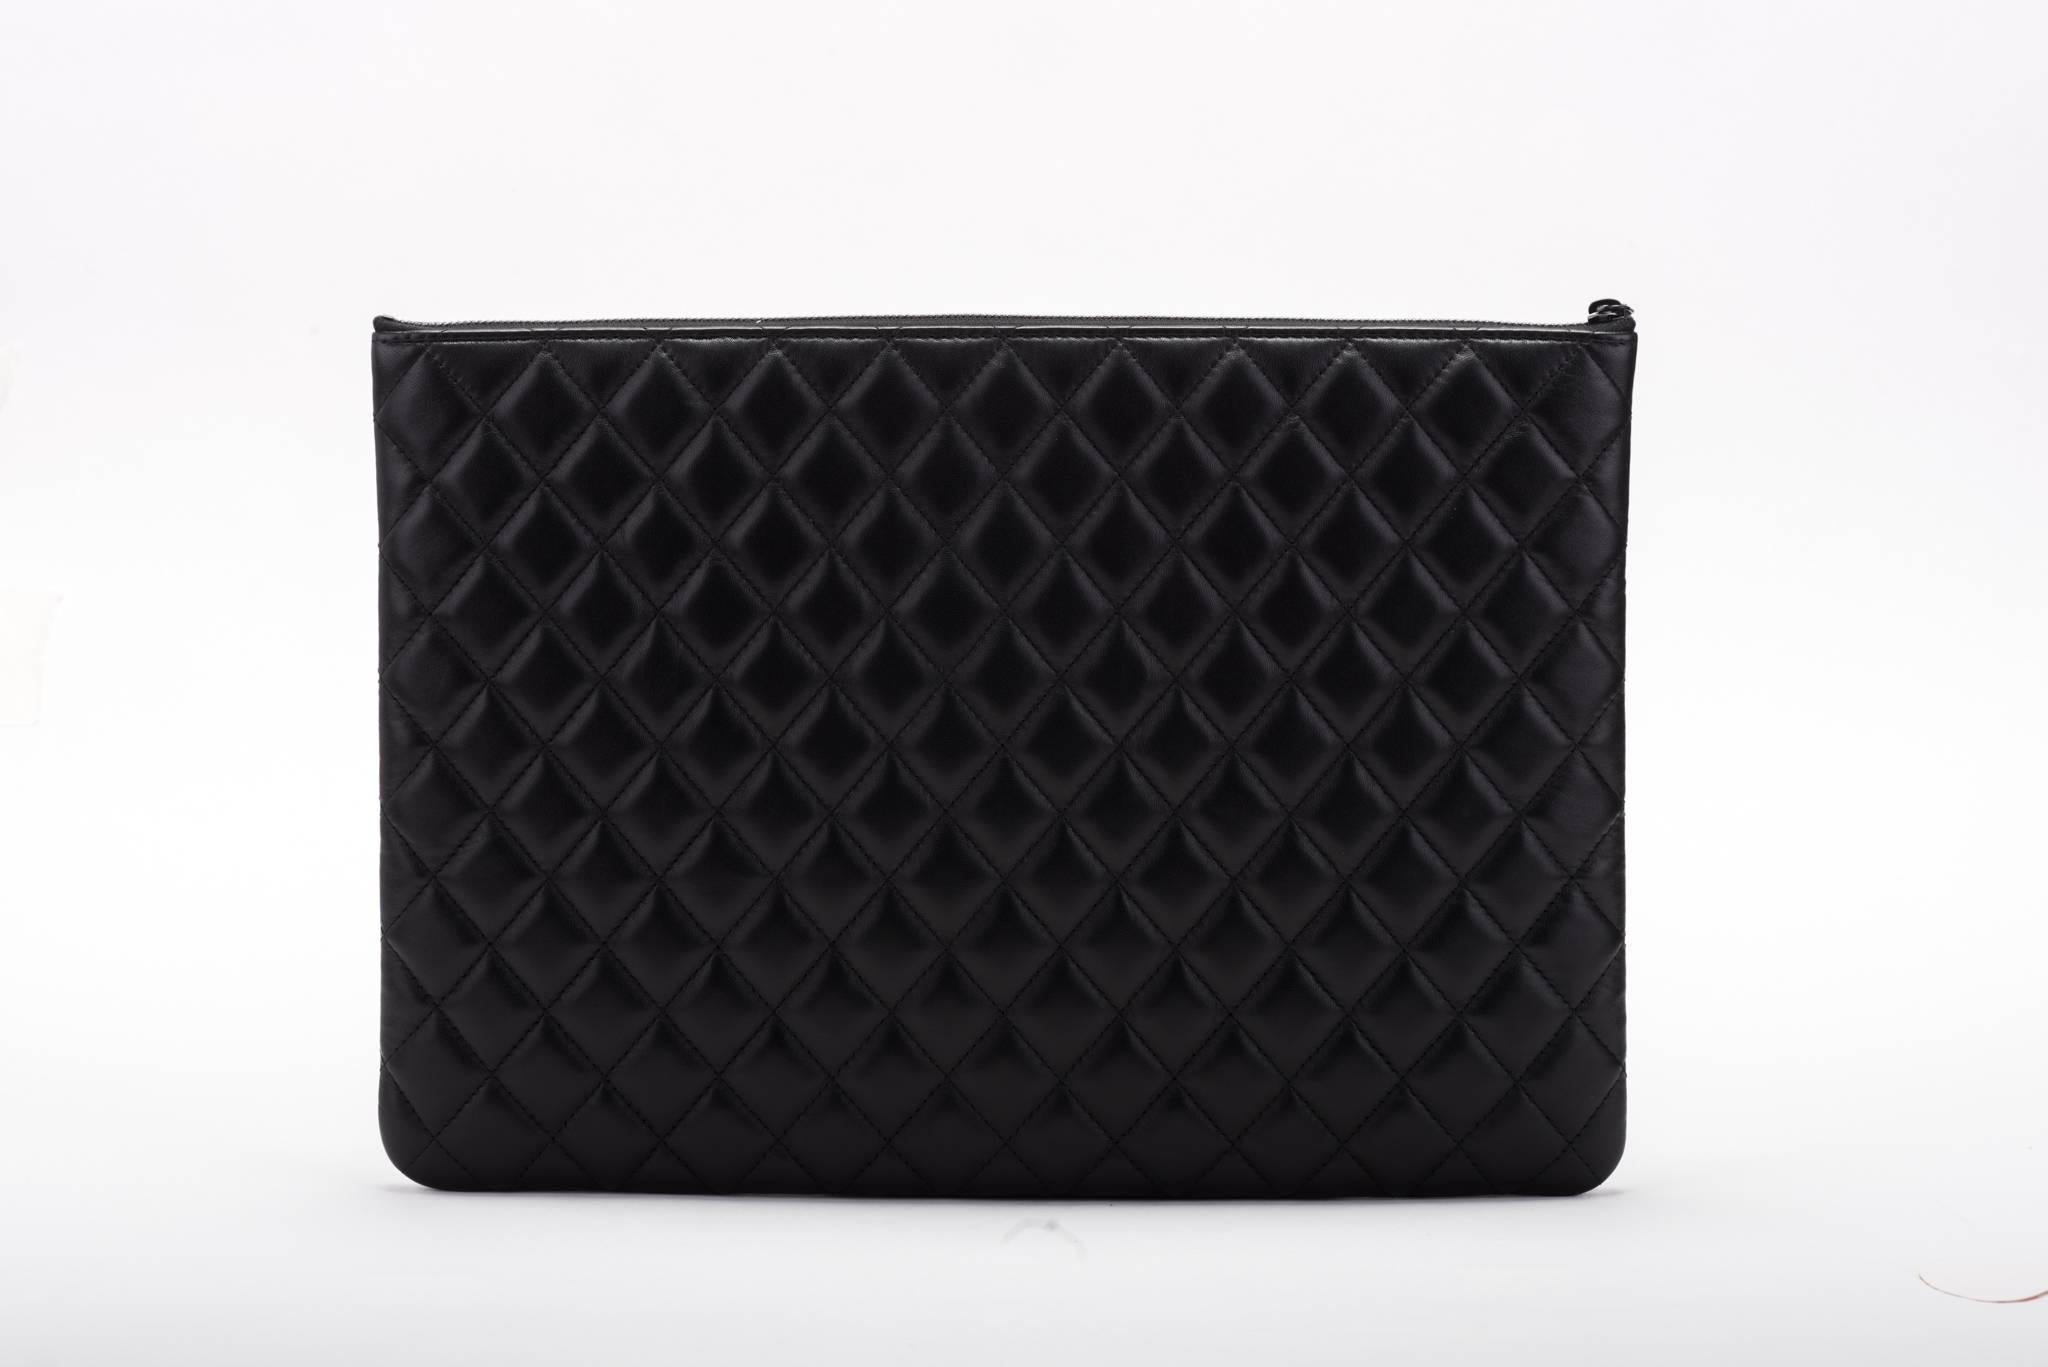 Chanel brand new in box timeless black and white quilted  clutch. Signature CC center logo . Comes with hologram, ID card, booklet, box and ribbon.